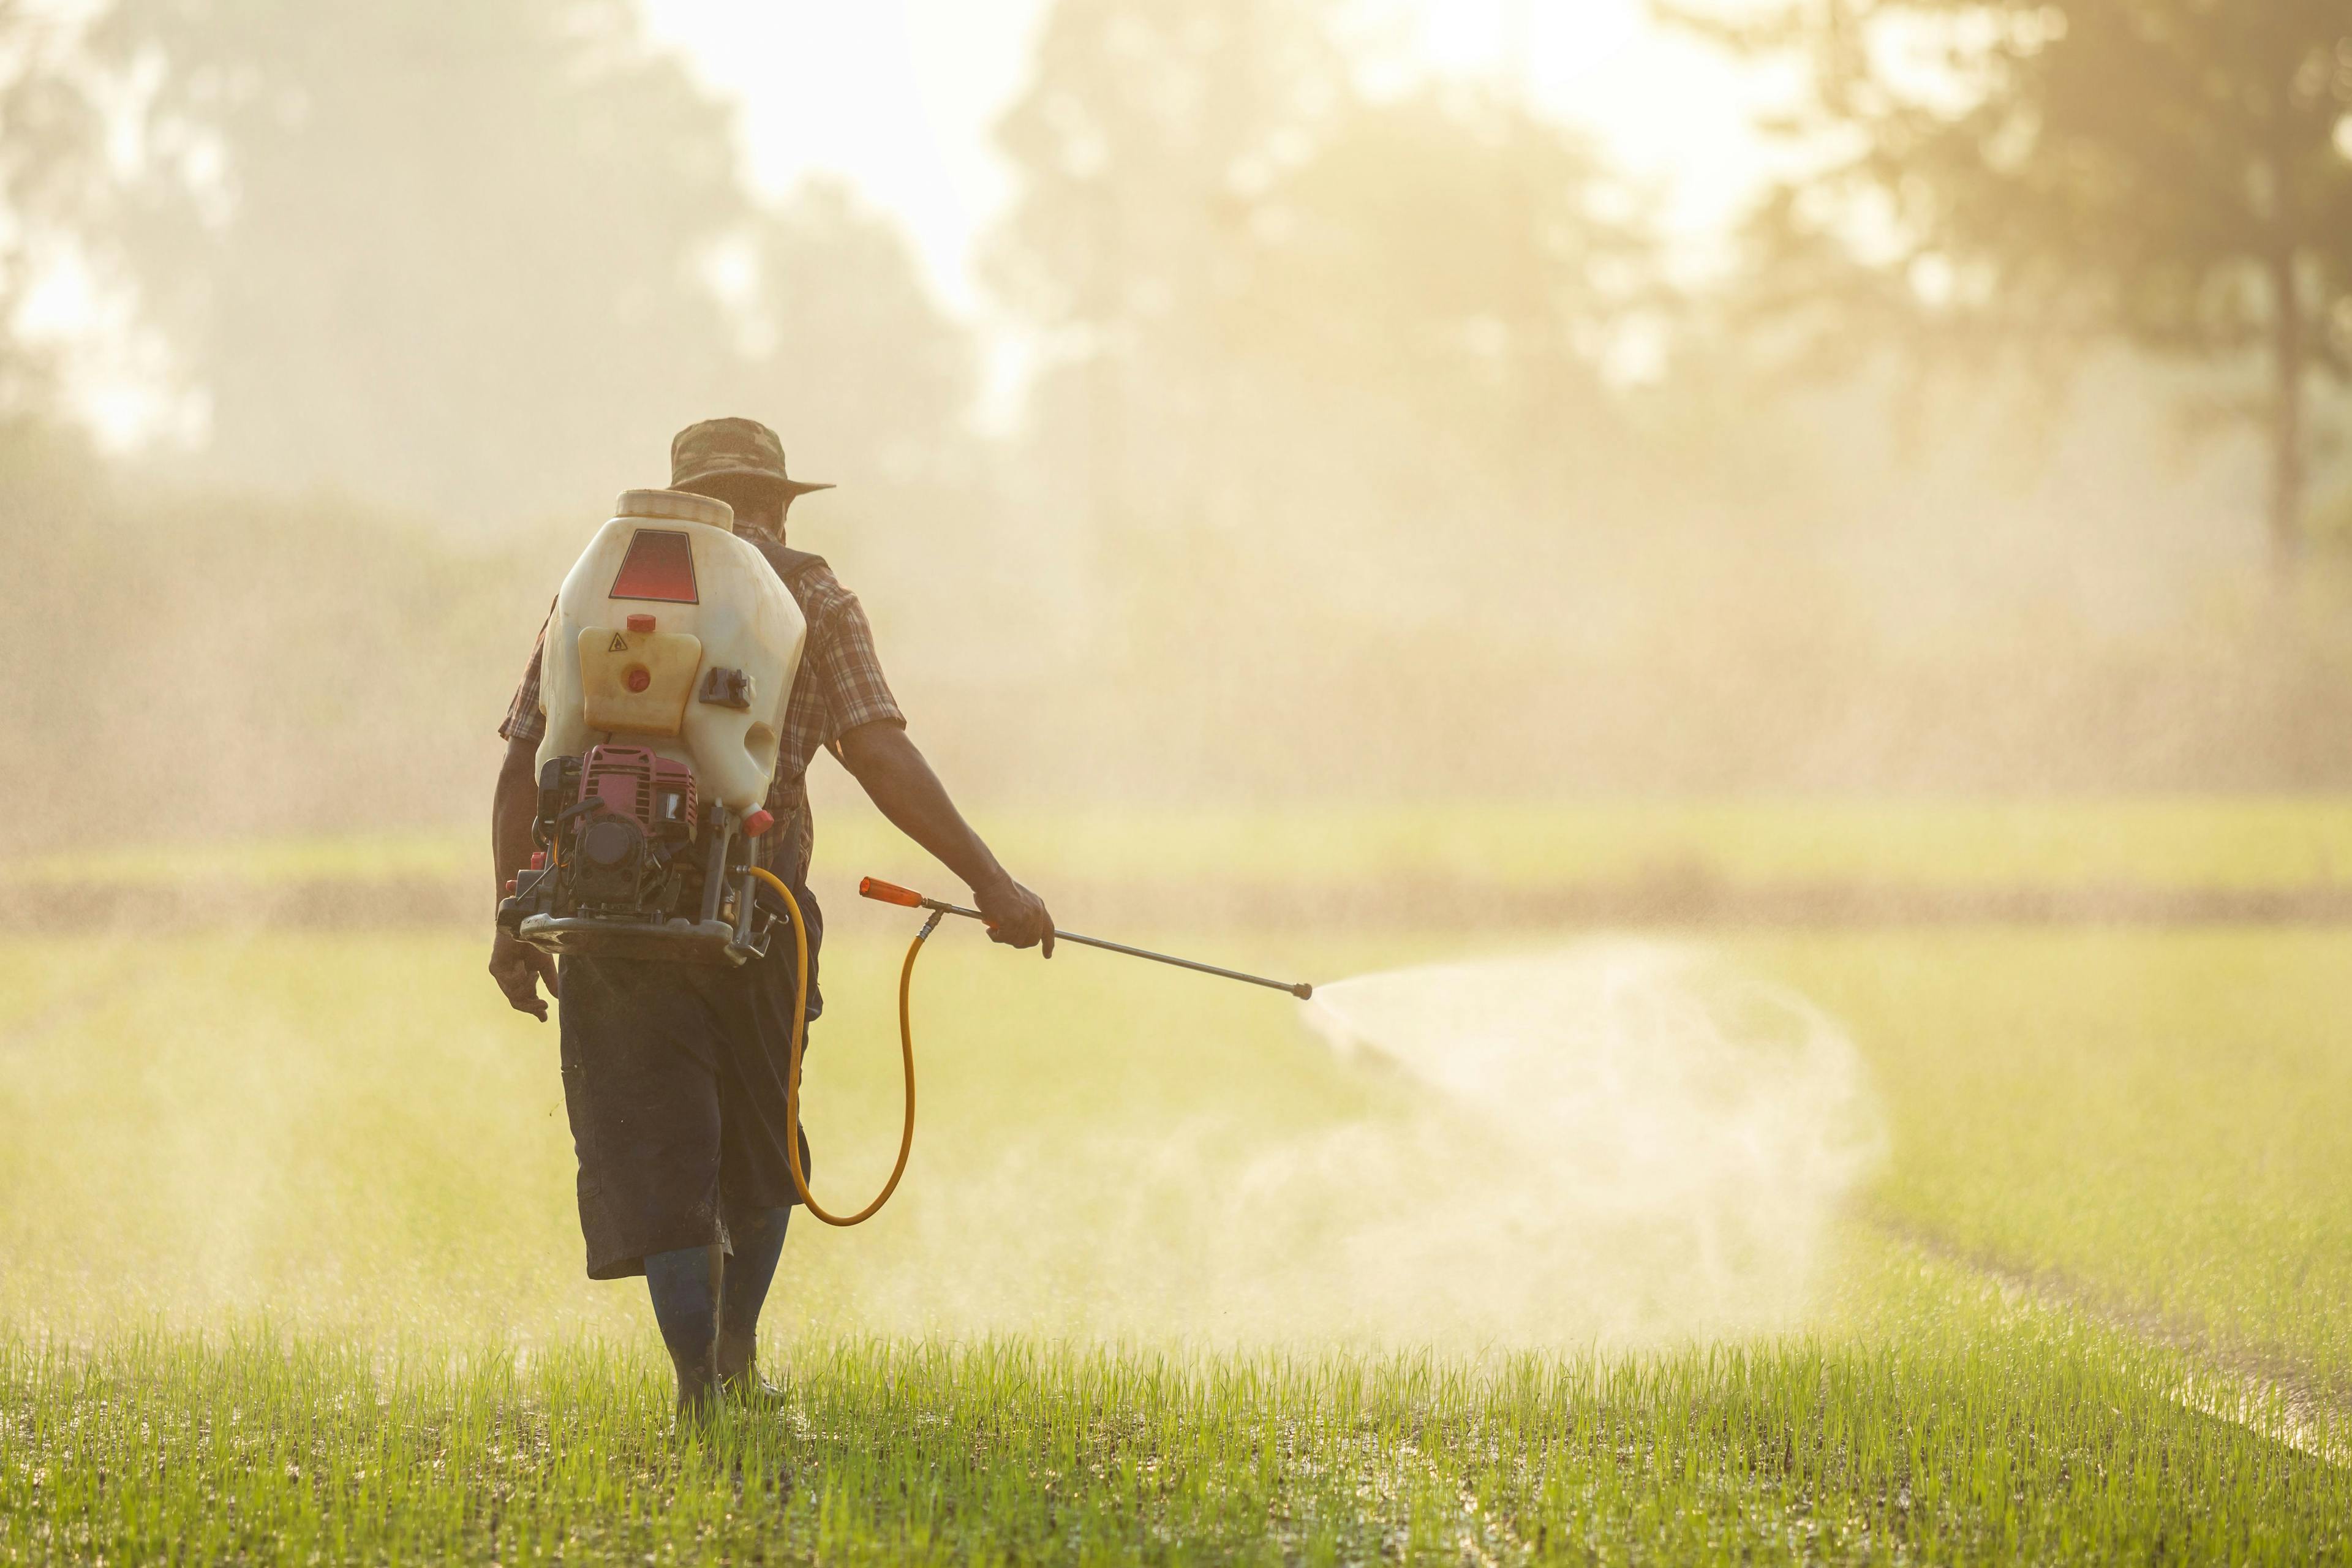 Study Reveals Association Between Adult Male Exposure to Insecticides, Decline in Sperm Concentration